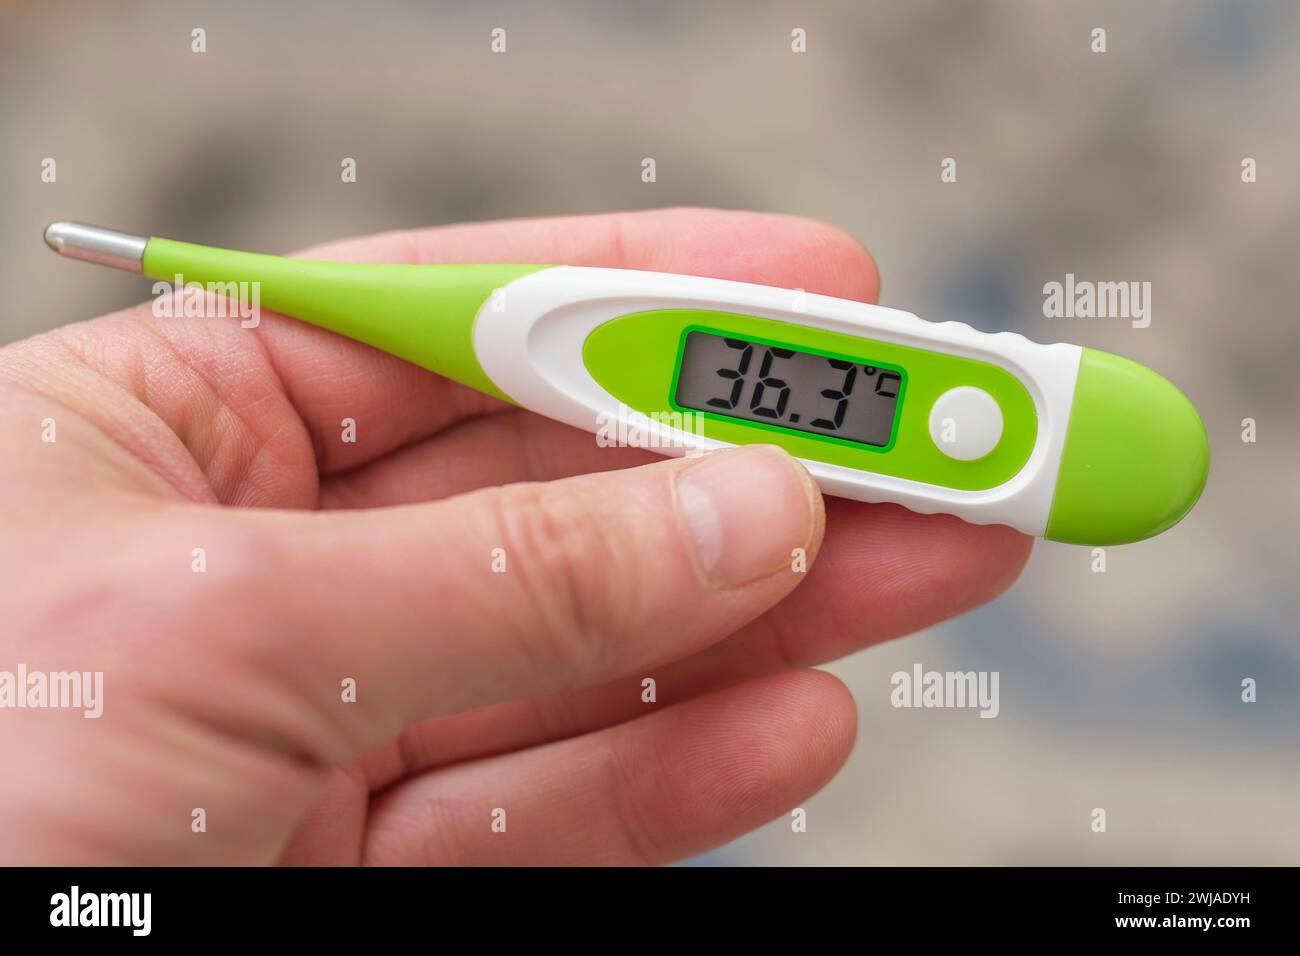 Hand with clinical thermometer Stock Photo